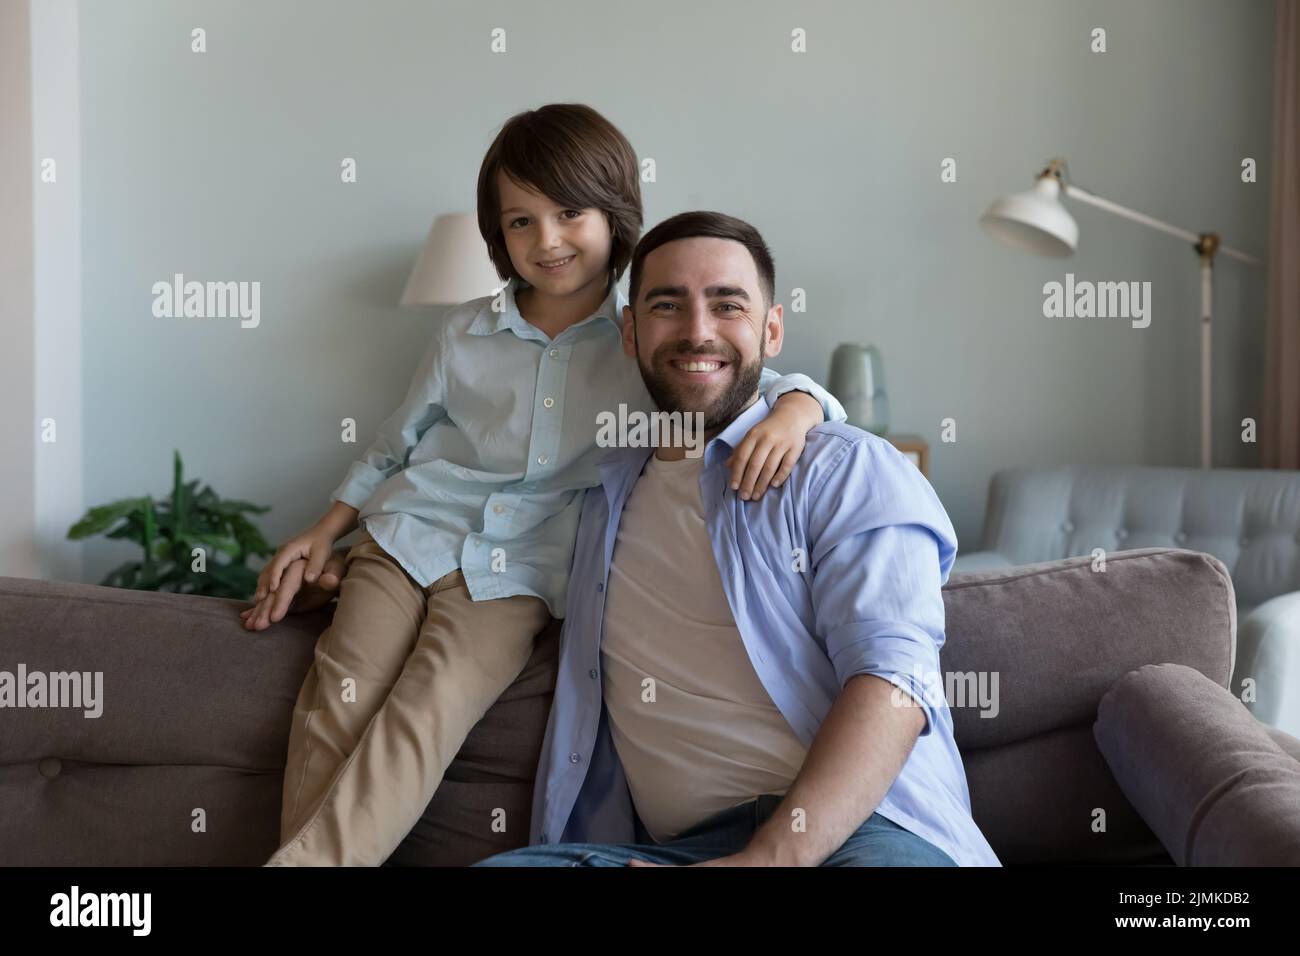 Young father and preschooler son smile pose for camera Stock Photo